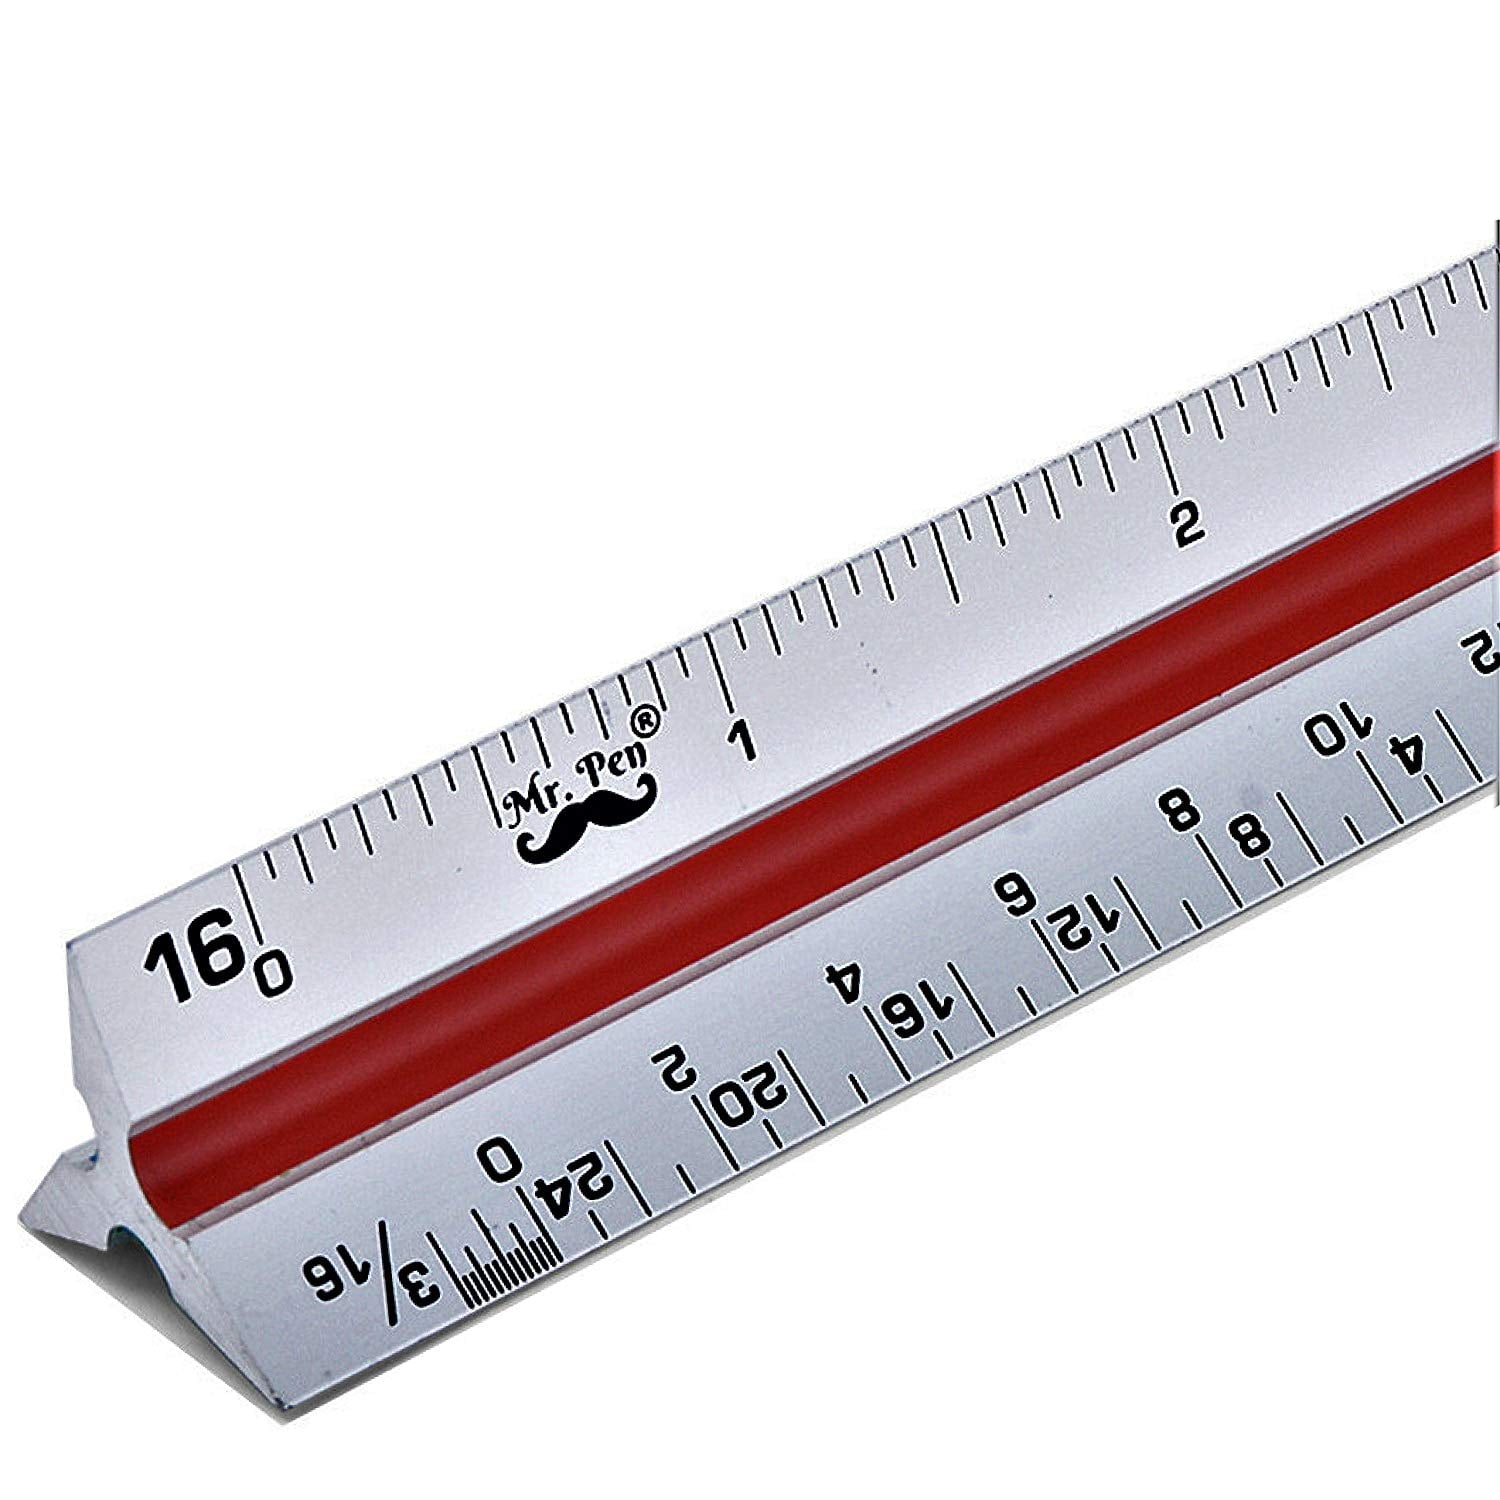 Student Staionery Supplies Measuring Kit for Drafting Architectural Scale Ruler 12 Inch Imperial Scale Ruler with Stainless Steel Ruler and Metal Compass Triangular Architect Scale Ruler Set